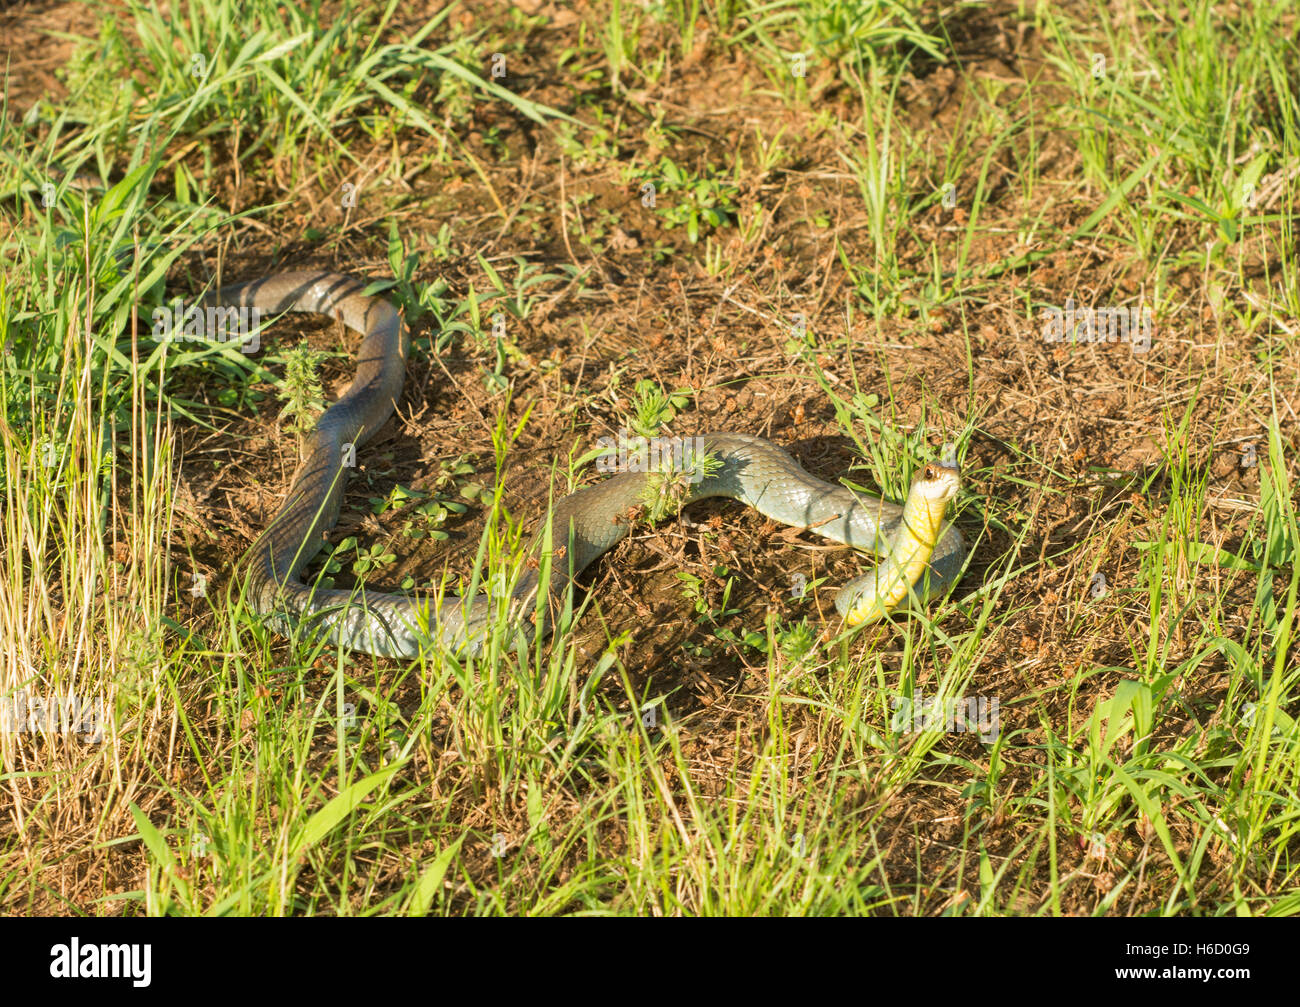 Yellow-bellied racer, Coluber constrictor flaviventris snake in grass, with his head raised up, in late evening sun Stock Photo